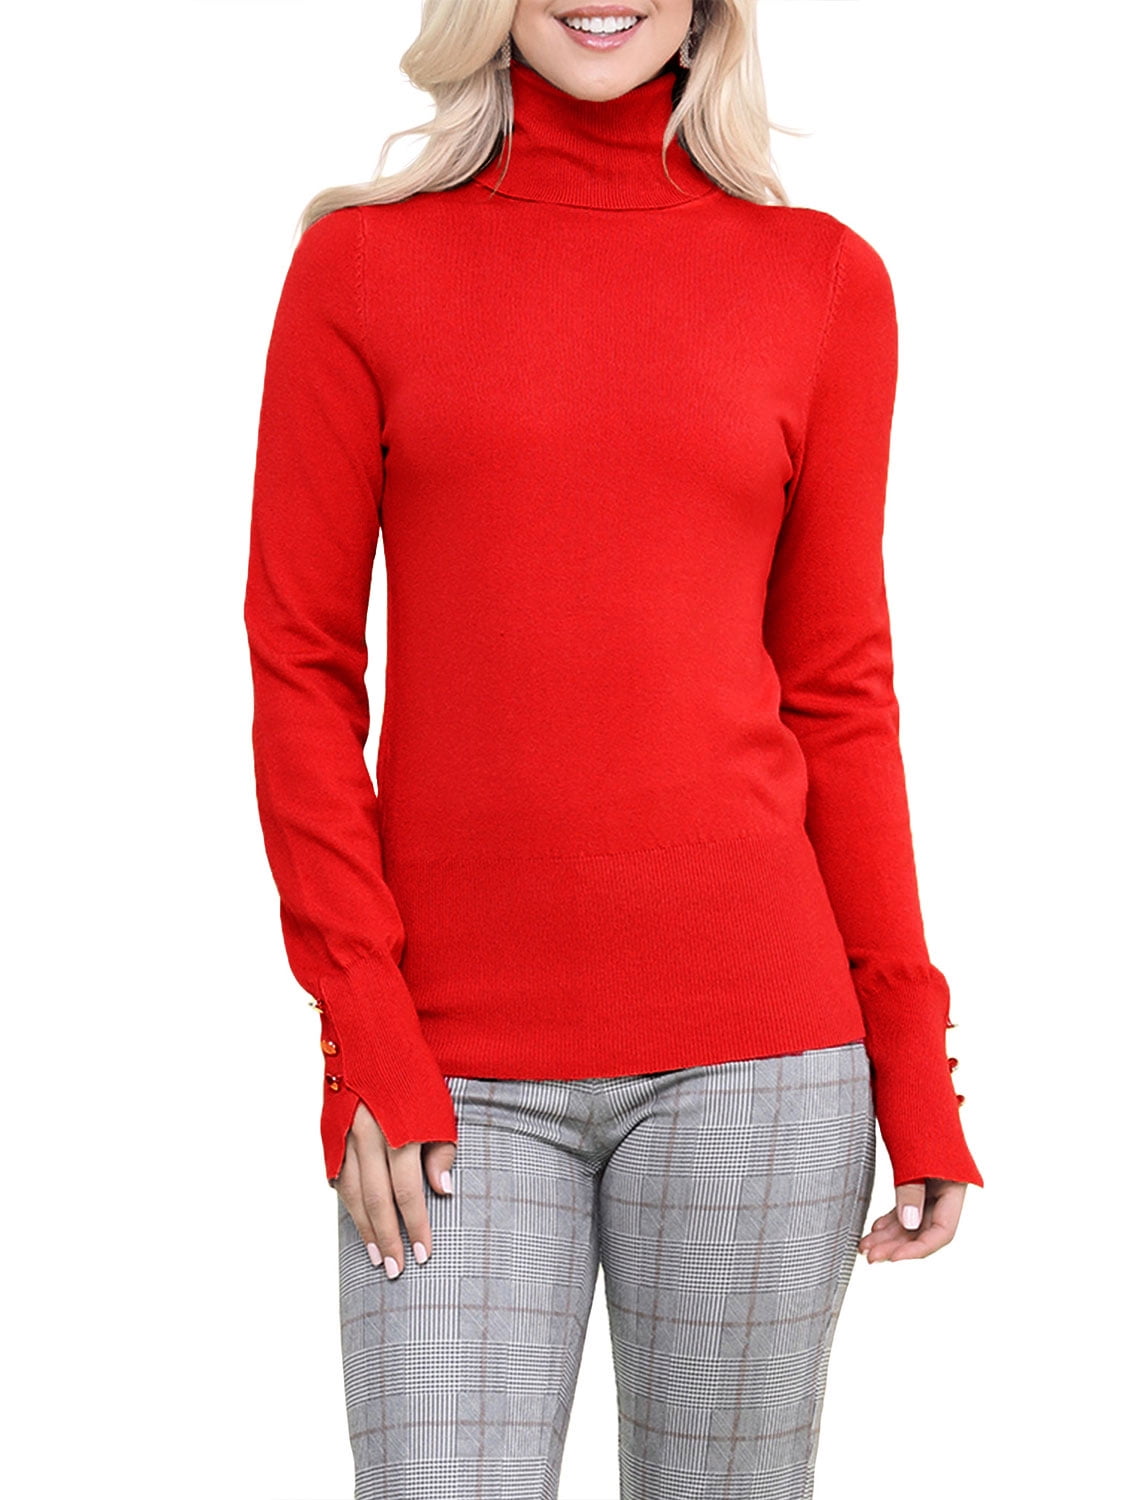 NINEXIS Women's Long Sleeve Turtle Neck Pullover Chic Soft Sweater with ...